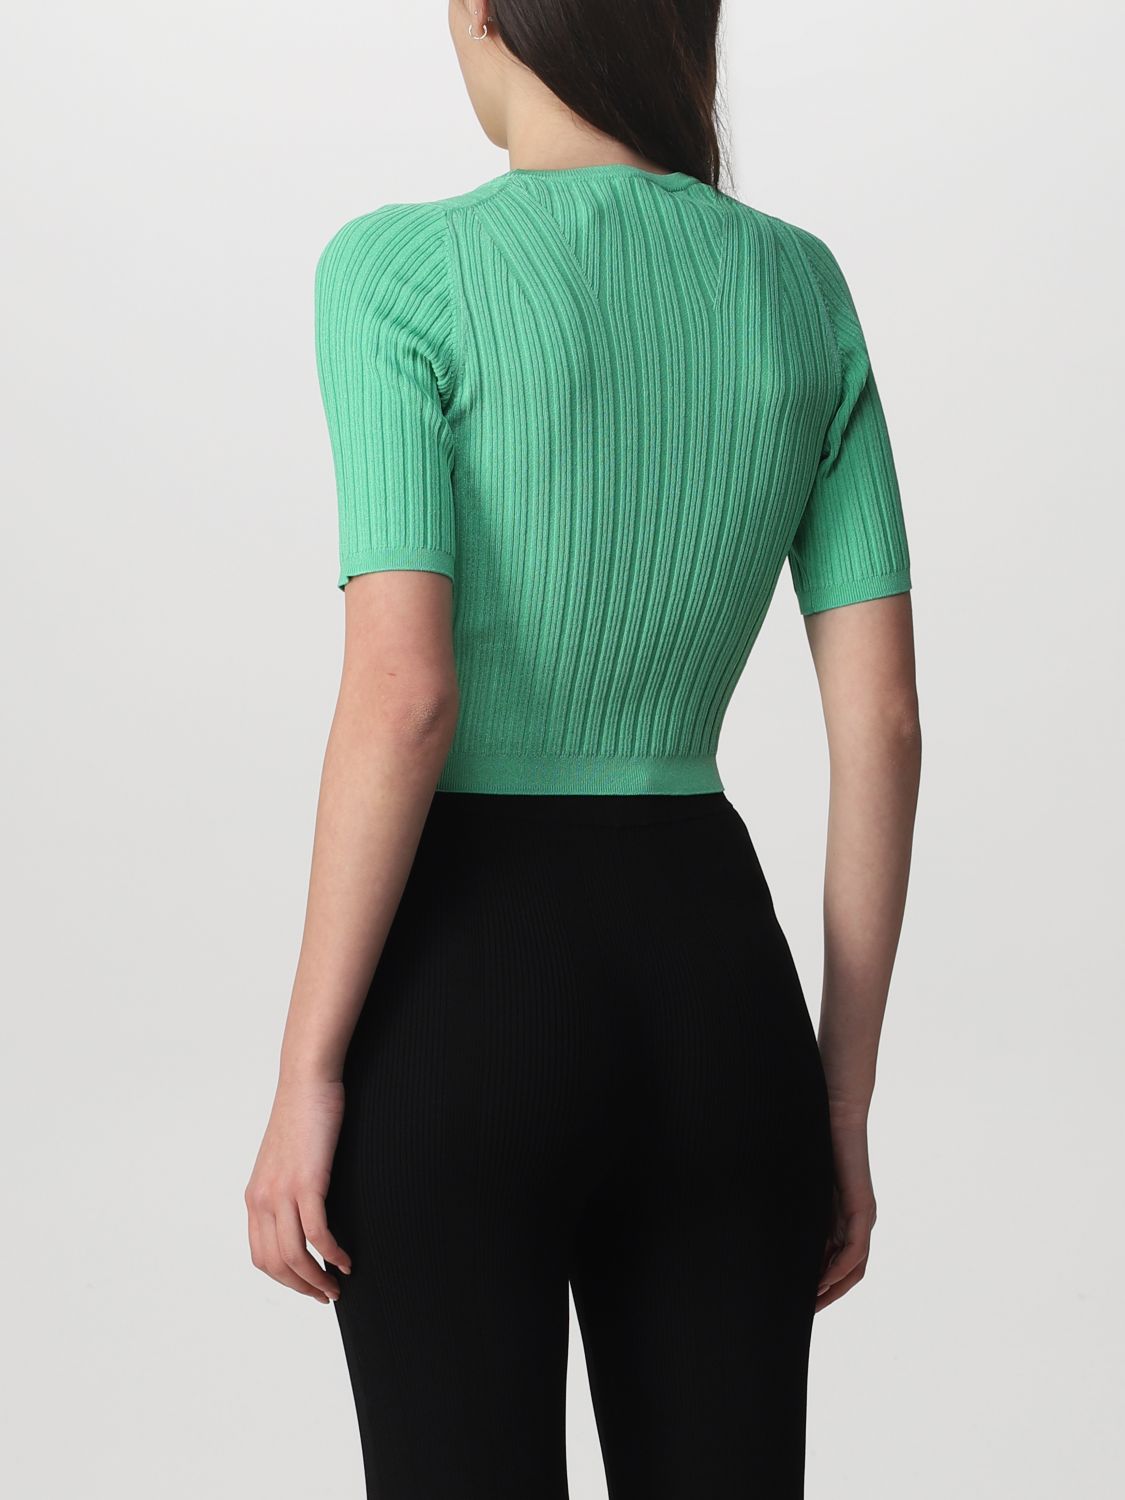 Jersey Remain: Top mujer Remain verde 2